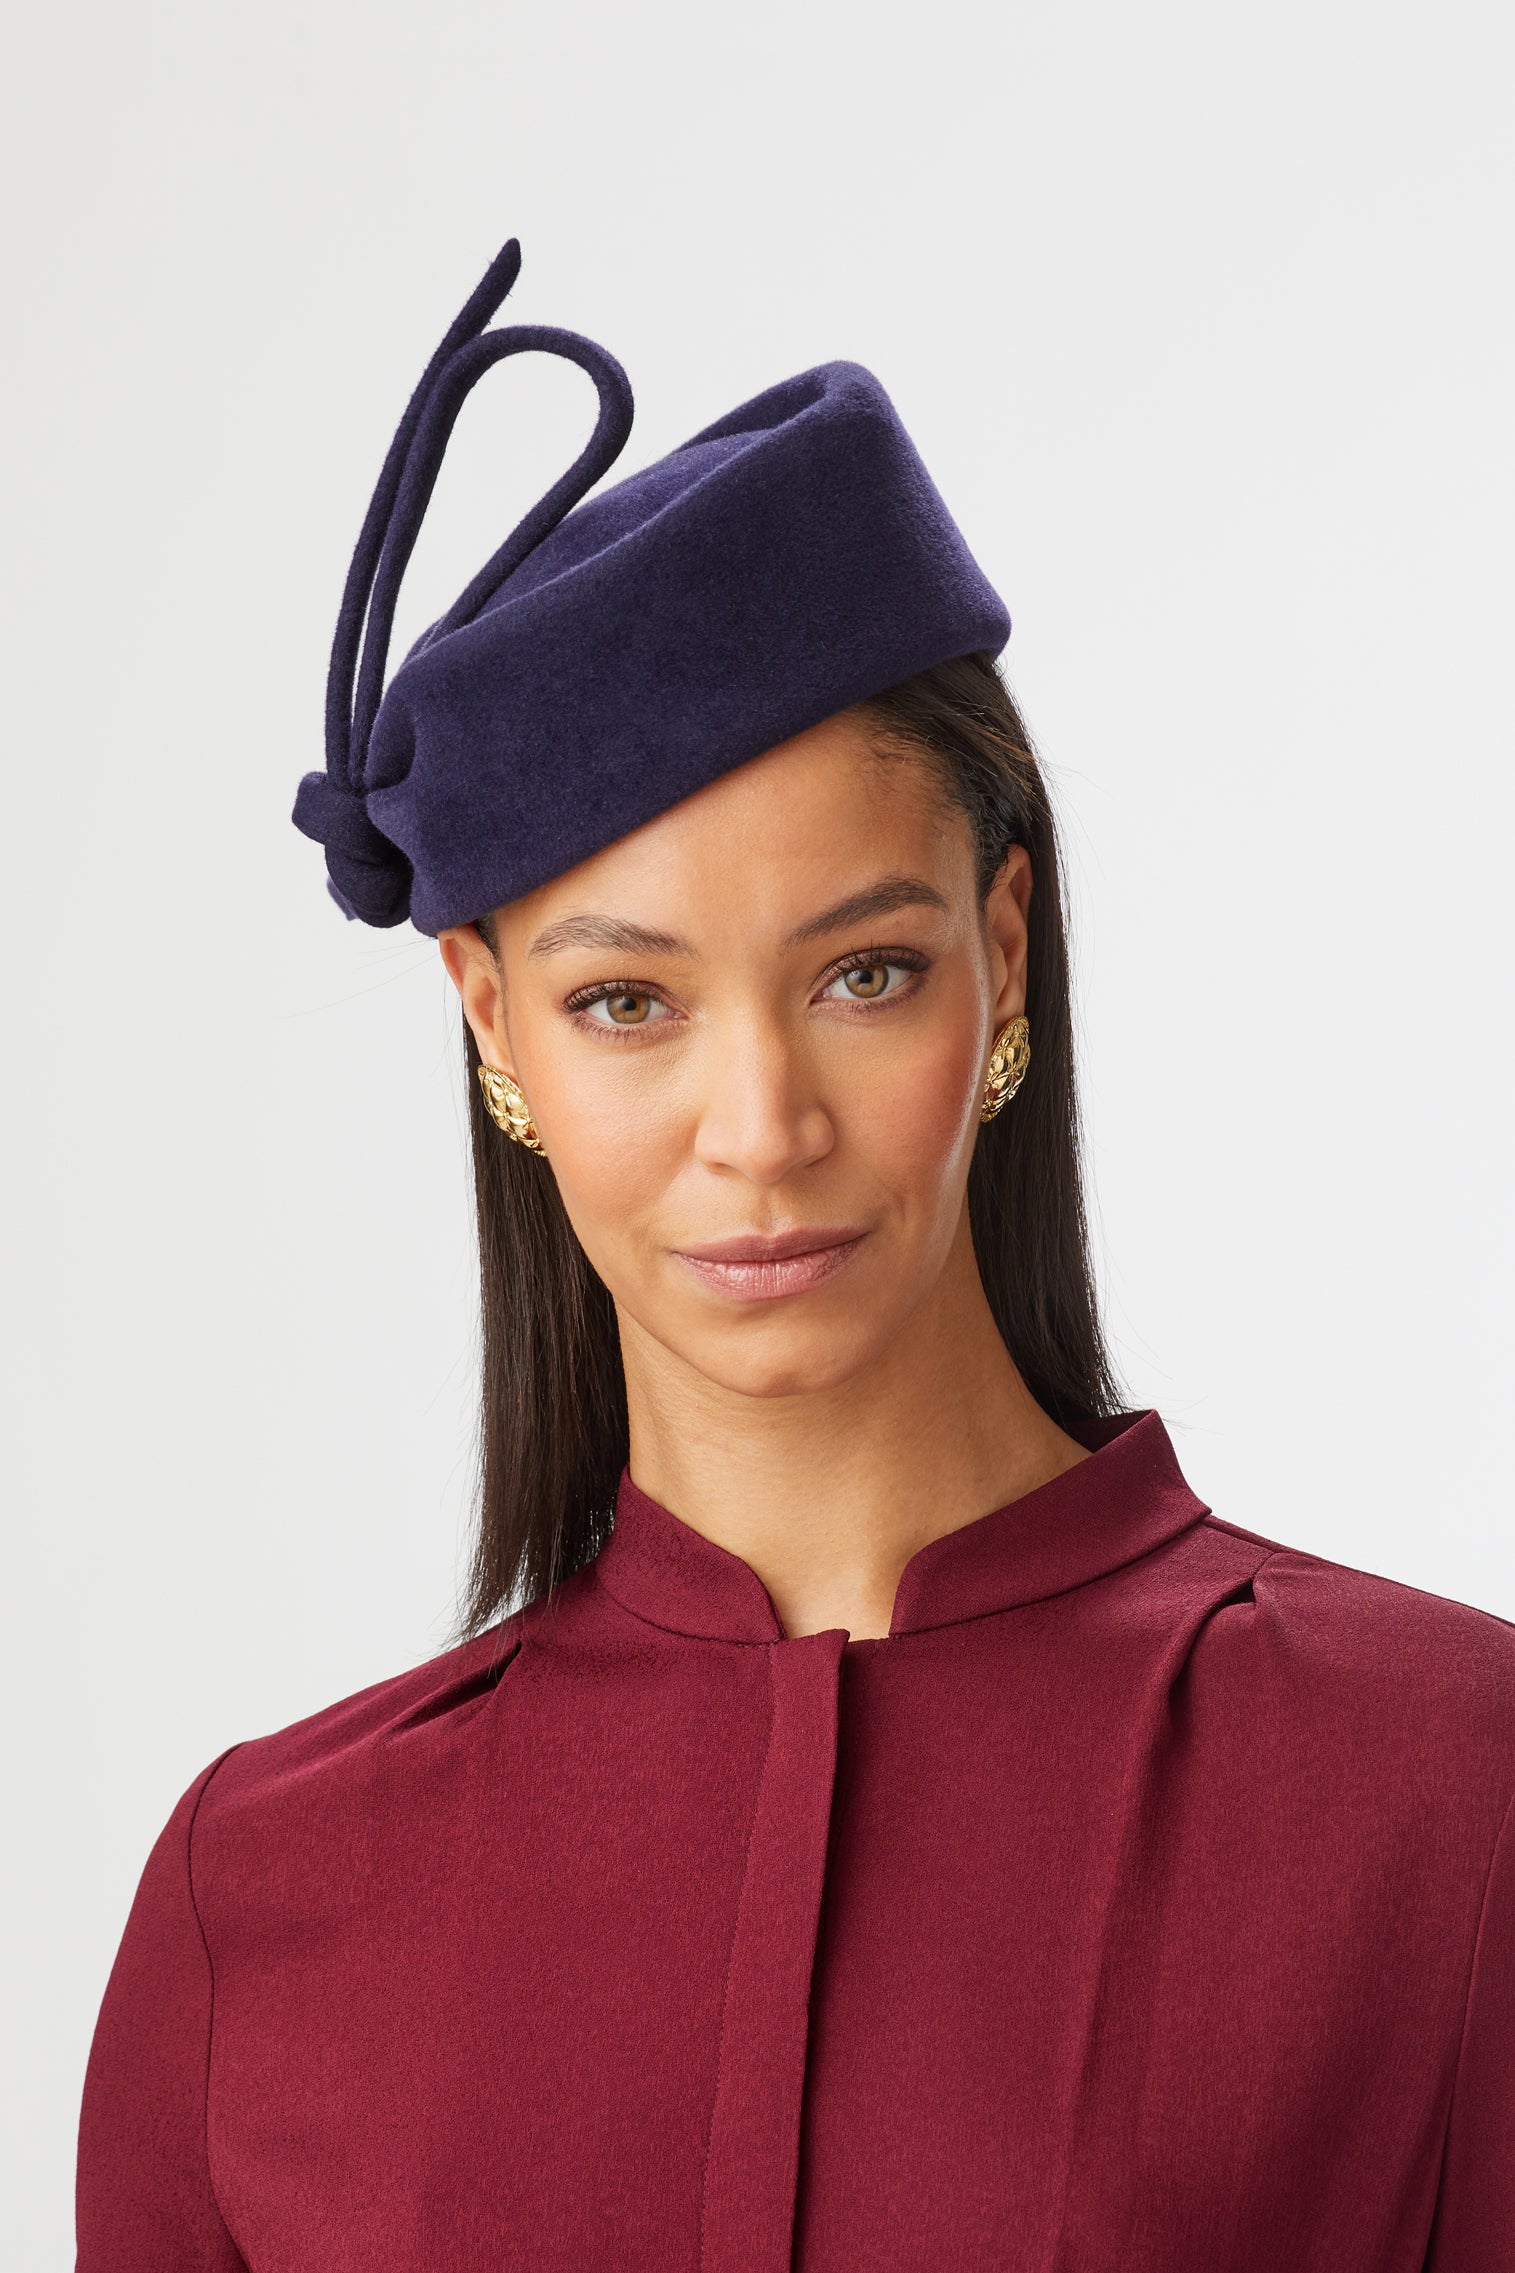 Mayfair Navy Pillbox Hat - Lock Couture by Awon Golding - Lock & Co. Hatters London UK